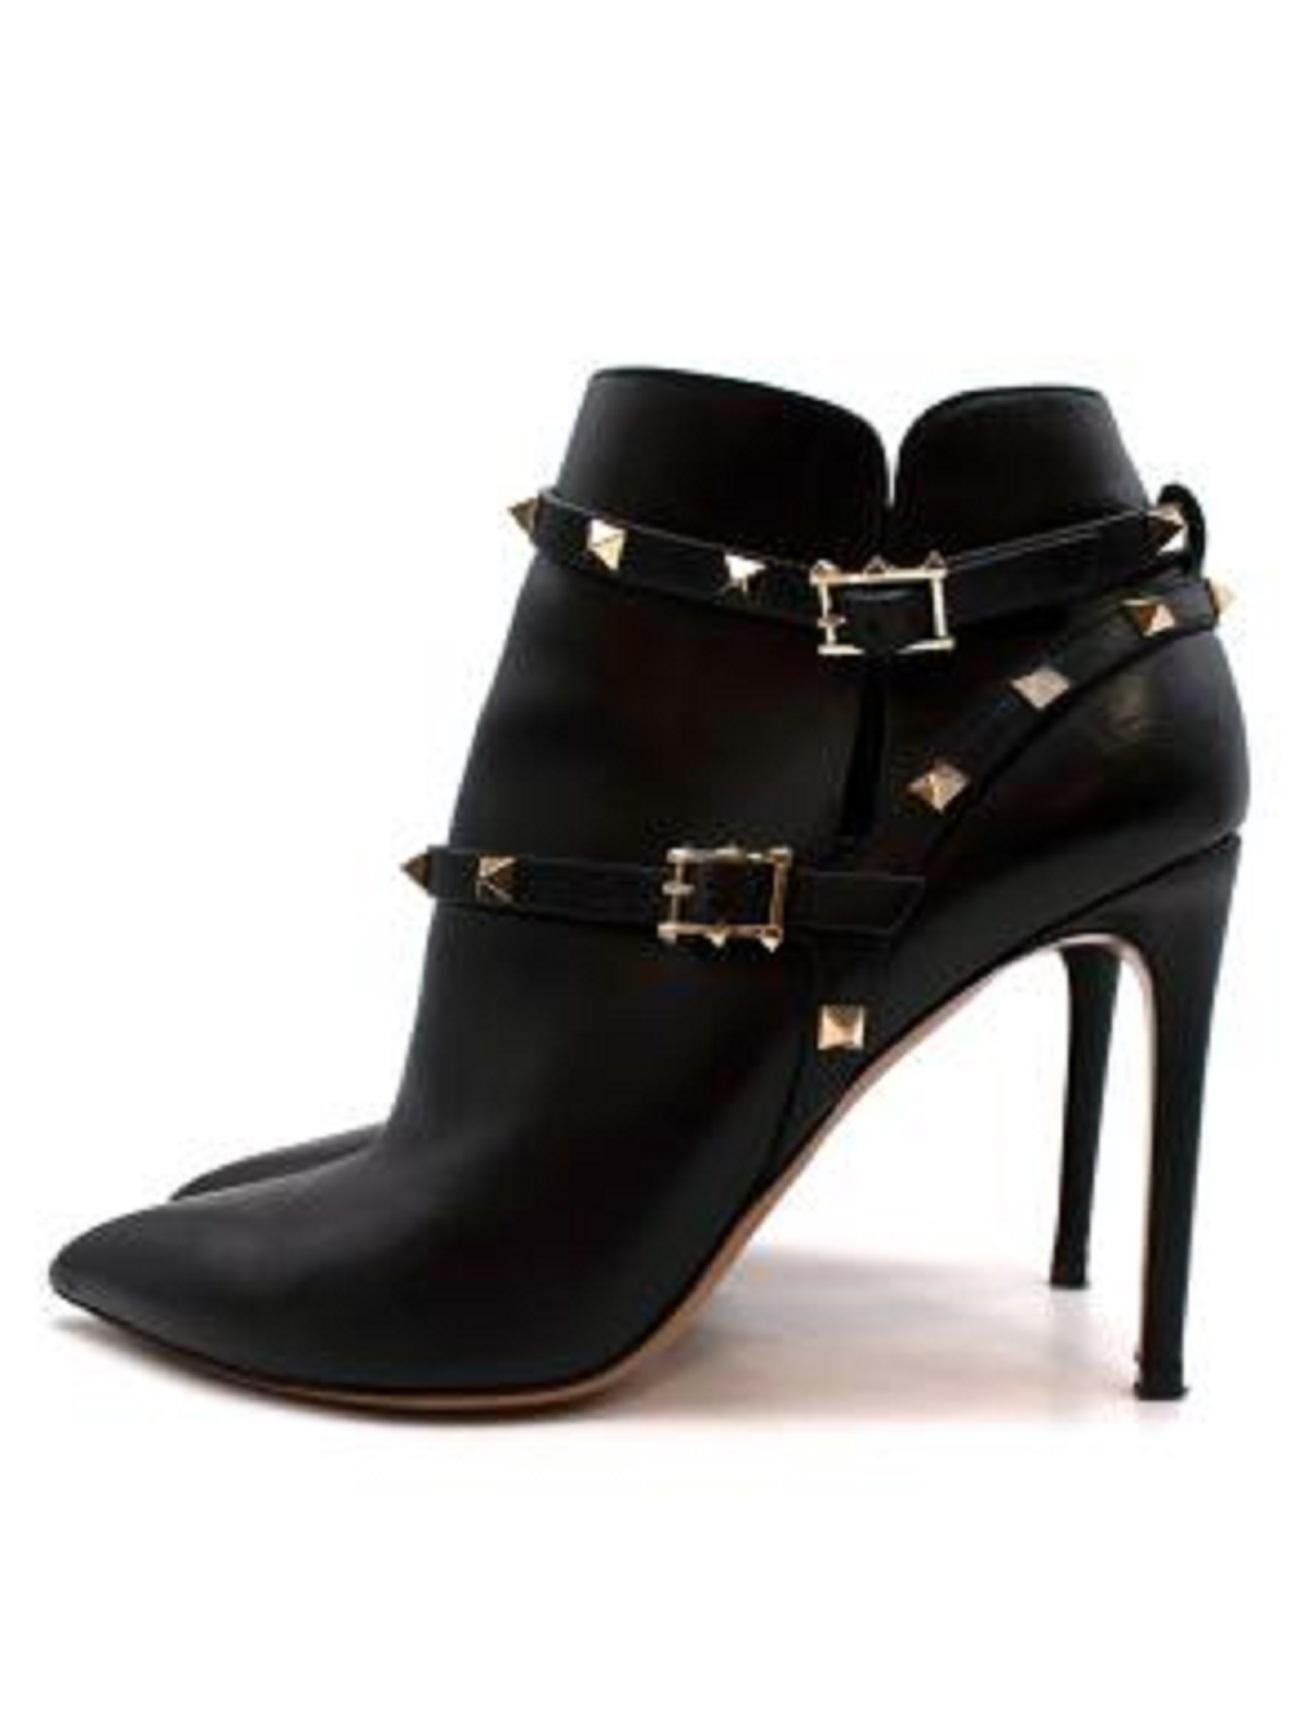 Valentino Black Leather Rockstud Ankle Boots For Sale 1